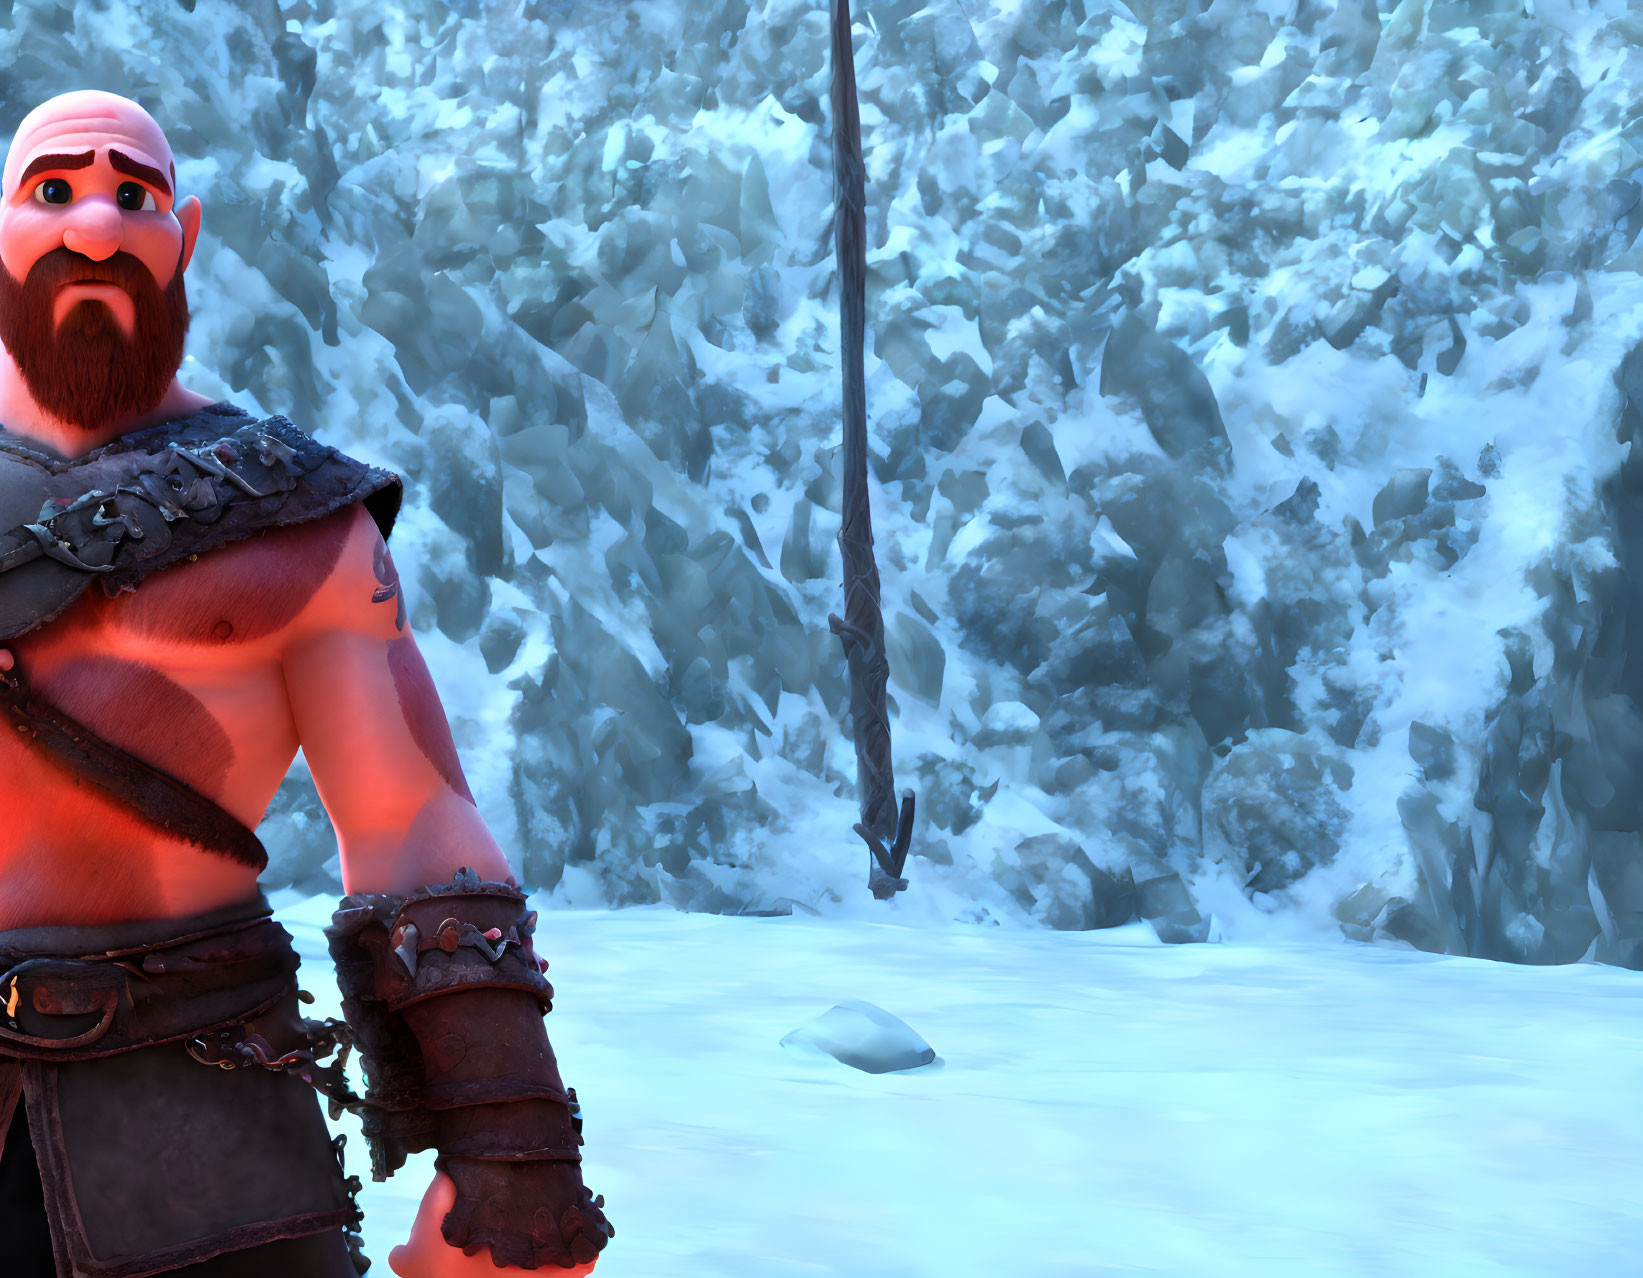 Muscular animated character with red beard in snowy landscape.